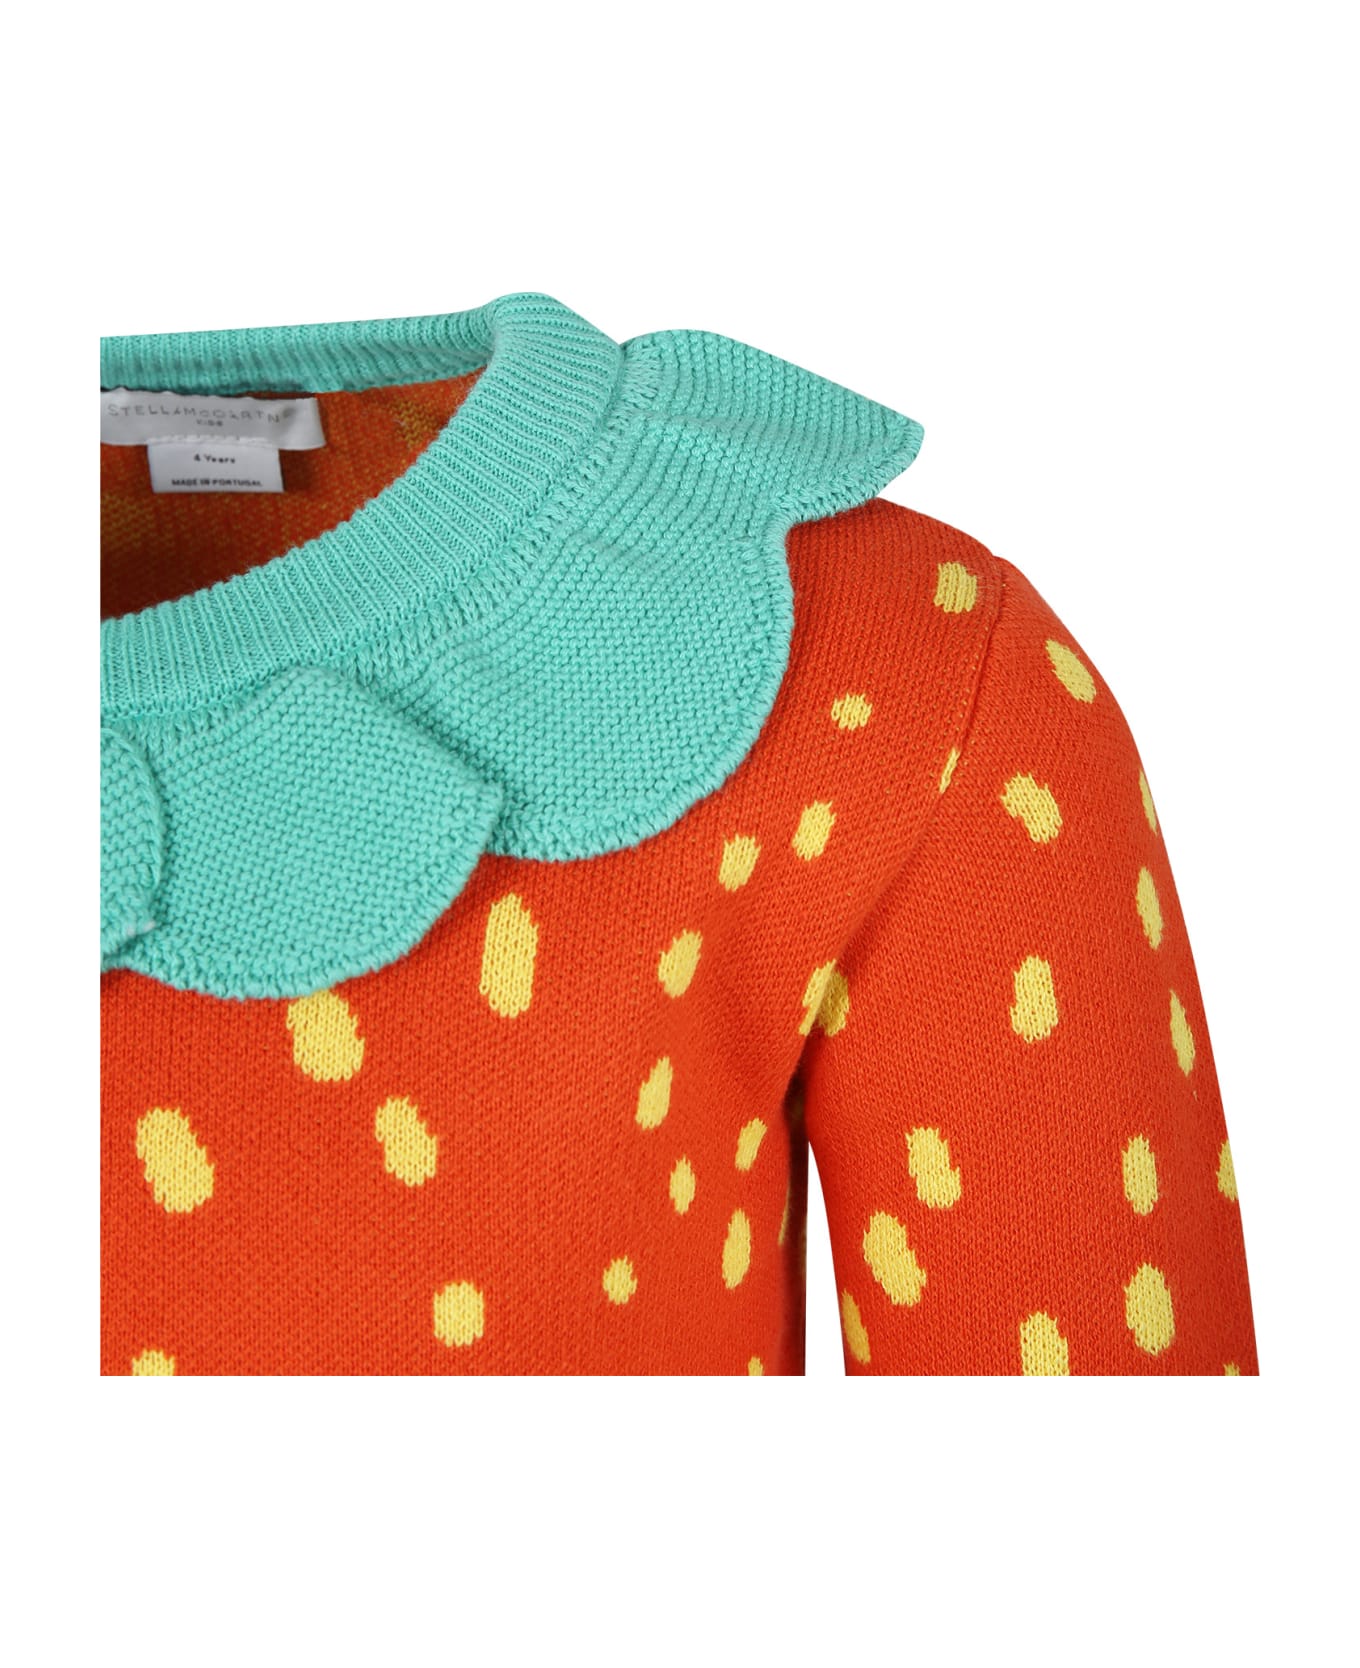 Stella McCartney Kids Red Sweater For Girl With All-over Print - Red